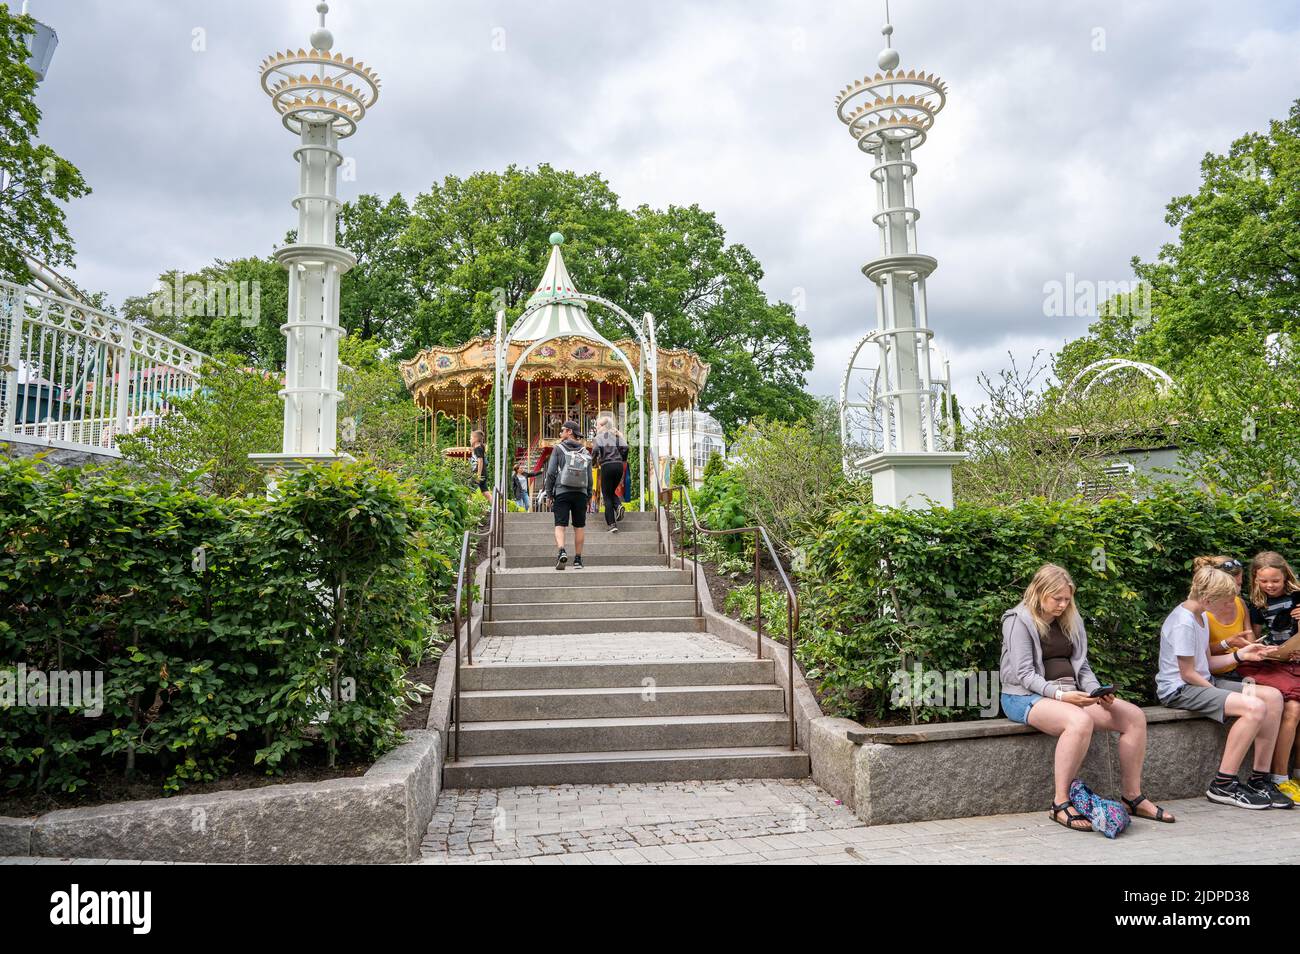 Gothenburg, Sweden - June 21, 2022: Liseberg amusement park opened in 1923 and currently is the largest in Scandinavia with 3 million visitors annuall Stock Photo